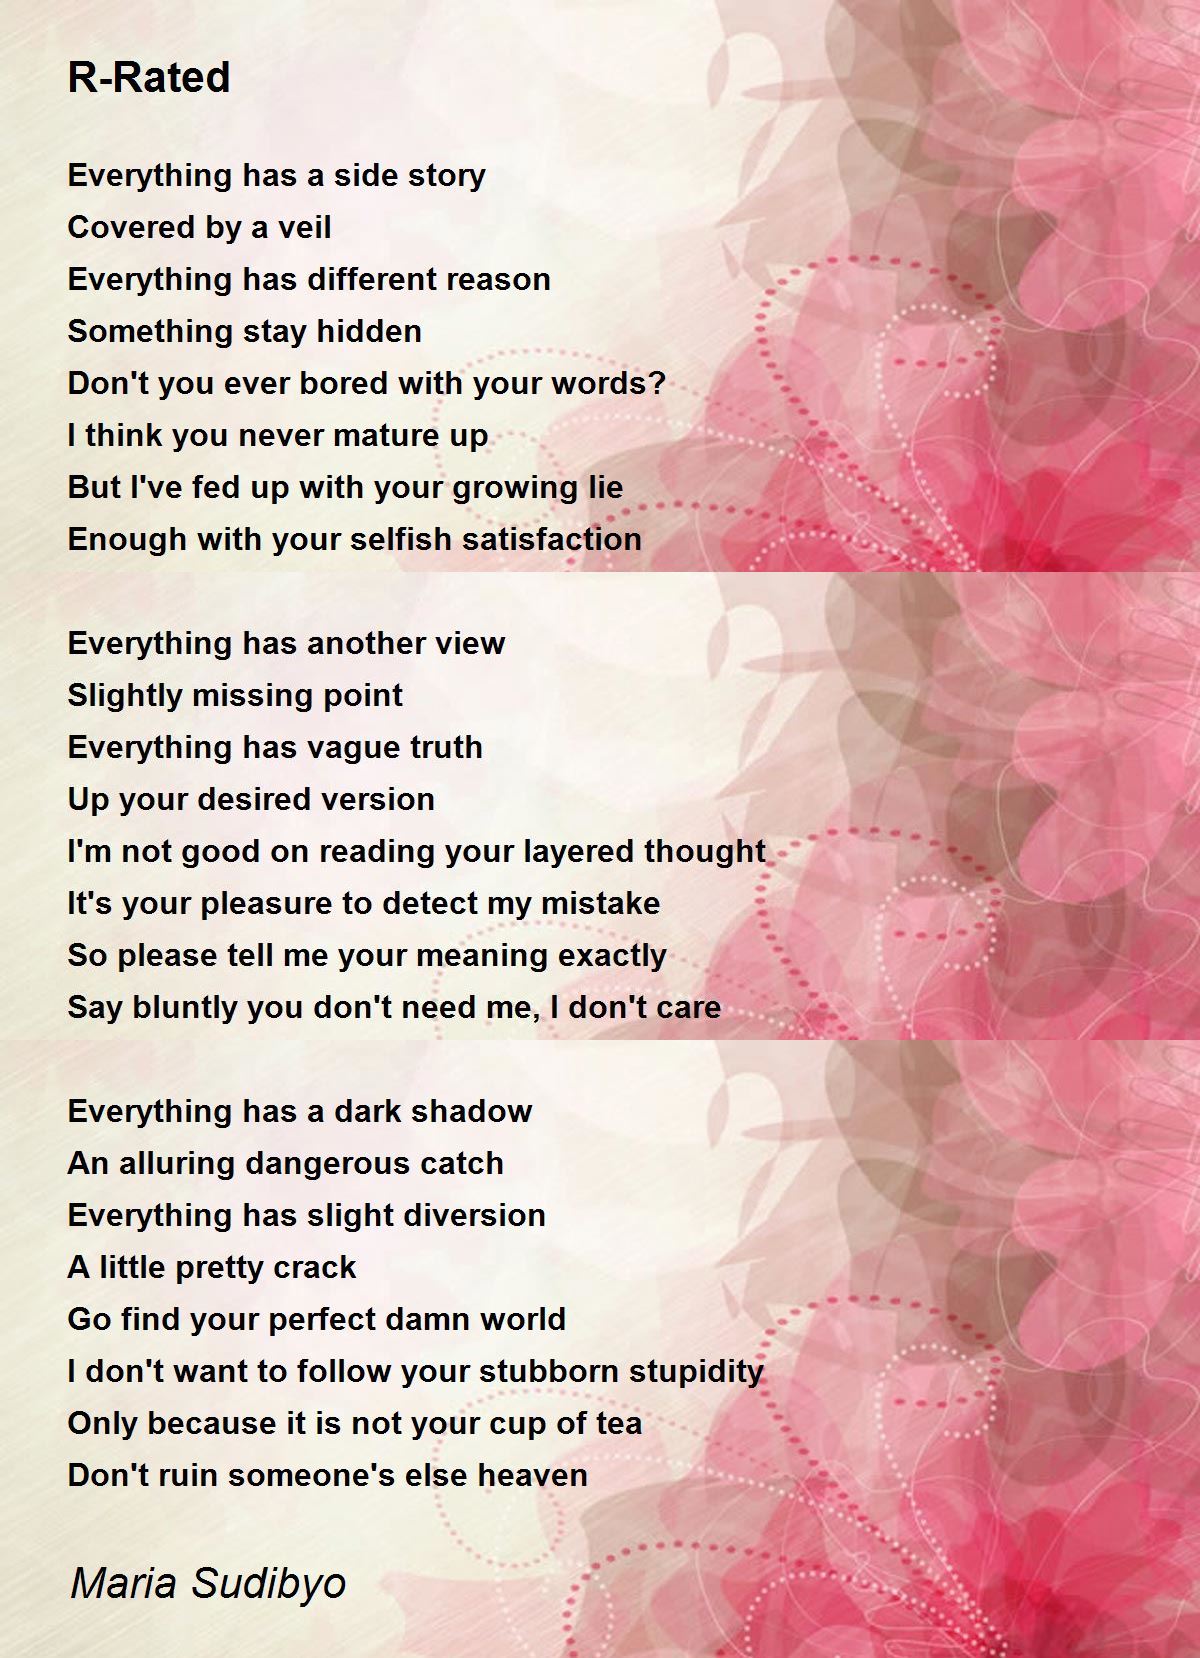 R-Rated - R-Rated Poem by Maria Sudibyo